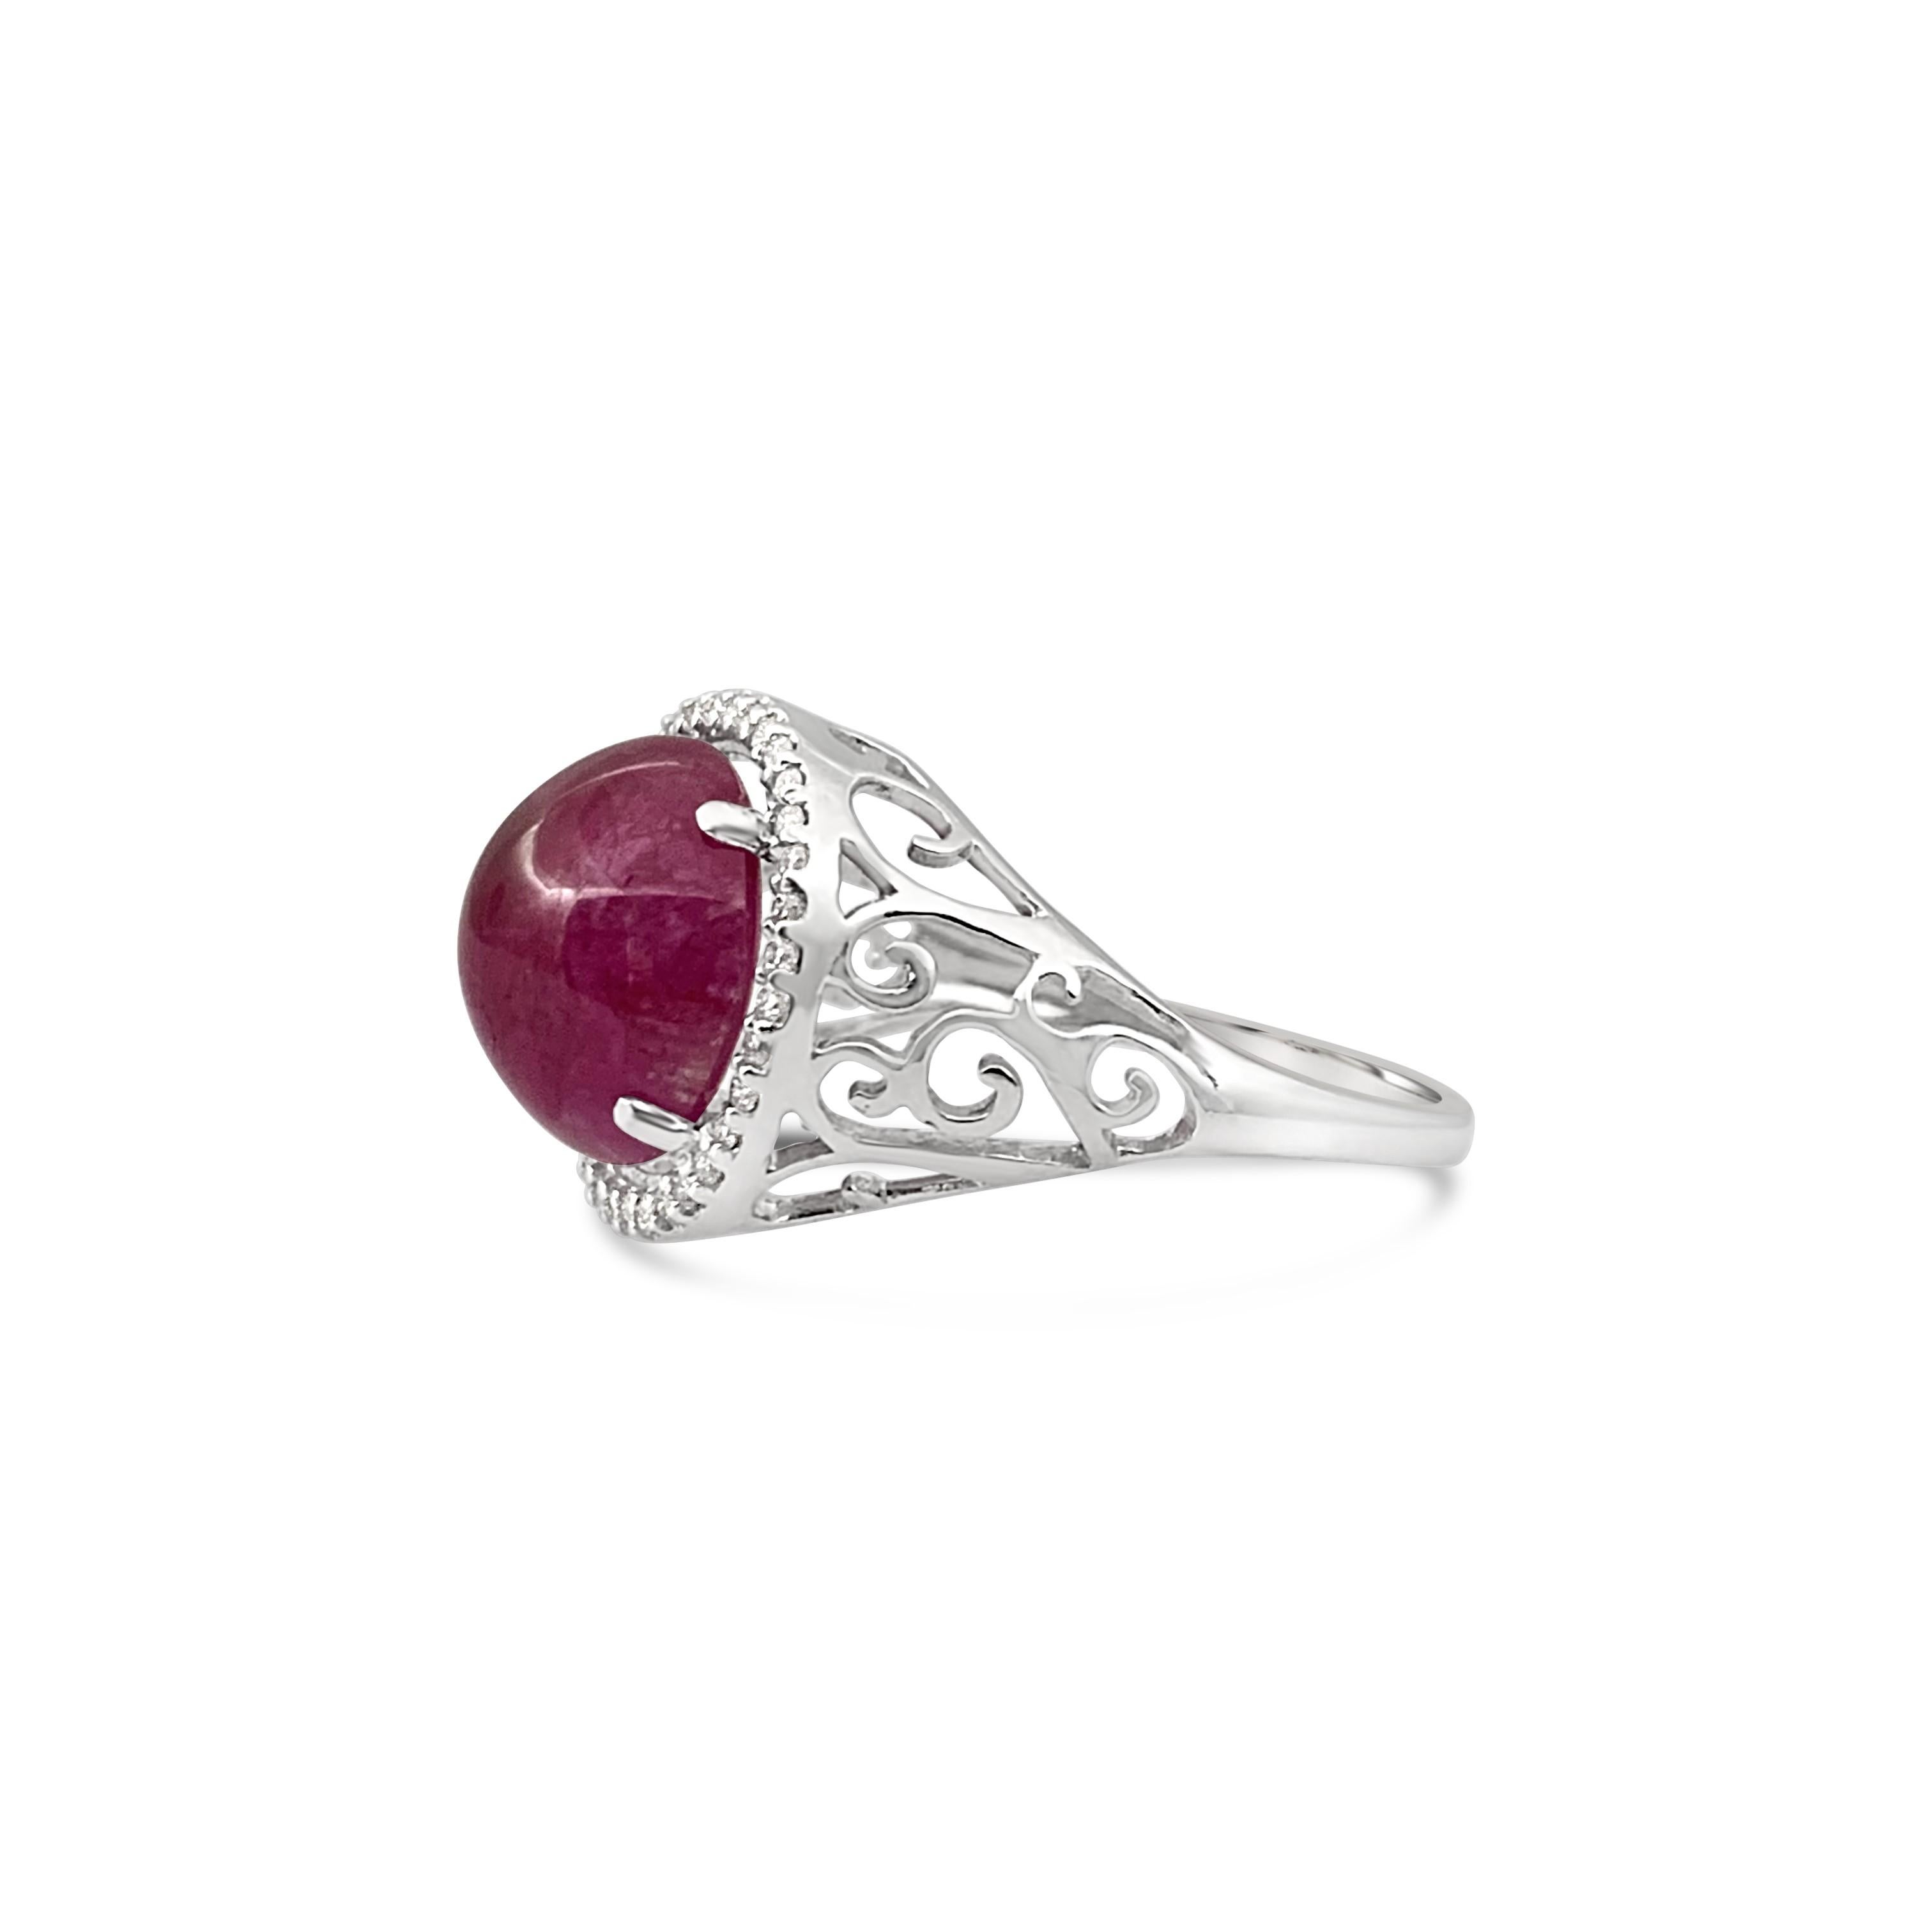 An extremely rare gemstone, this 7.46 carat natural Burmese ruby is a exquisite cabochon set a in timeless platinum ring.

Natural Burmese Ruby
Shape:	Cabochon
Color:	Red
Clarity:	Fine
Origin:Burma
Treatment:	No treatment
Dimensions:	11X11
Total